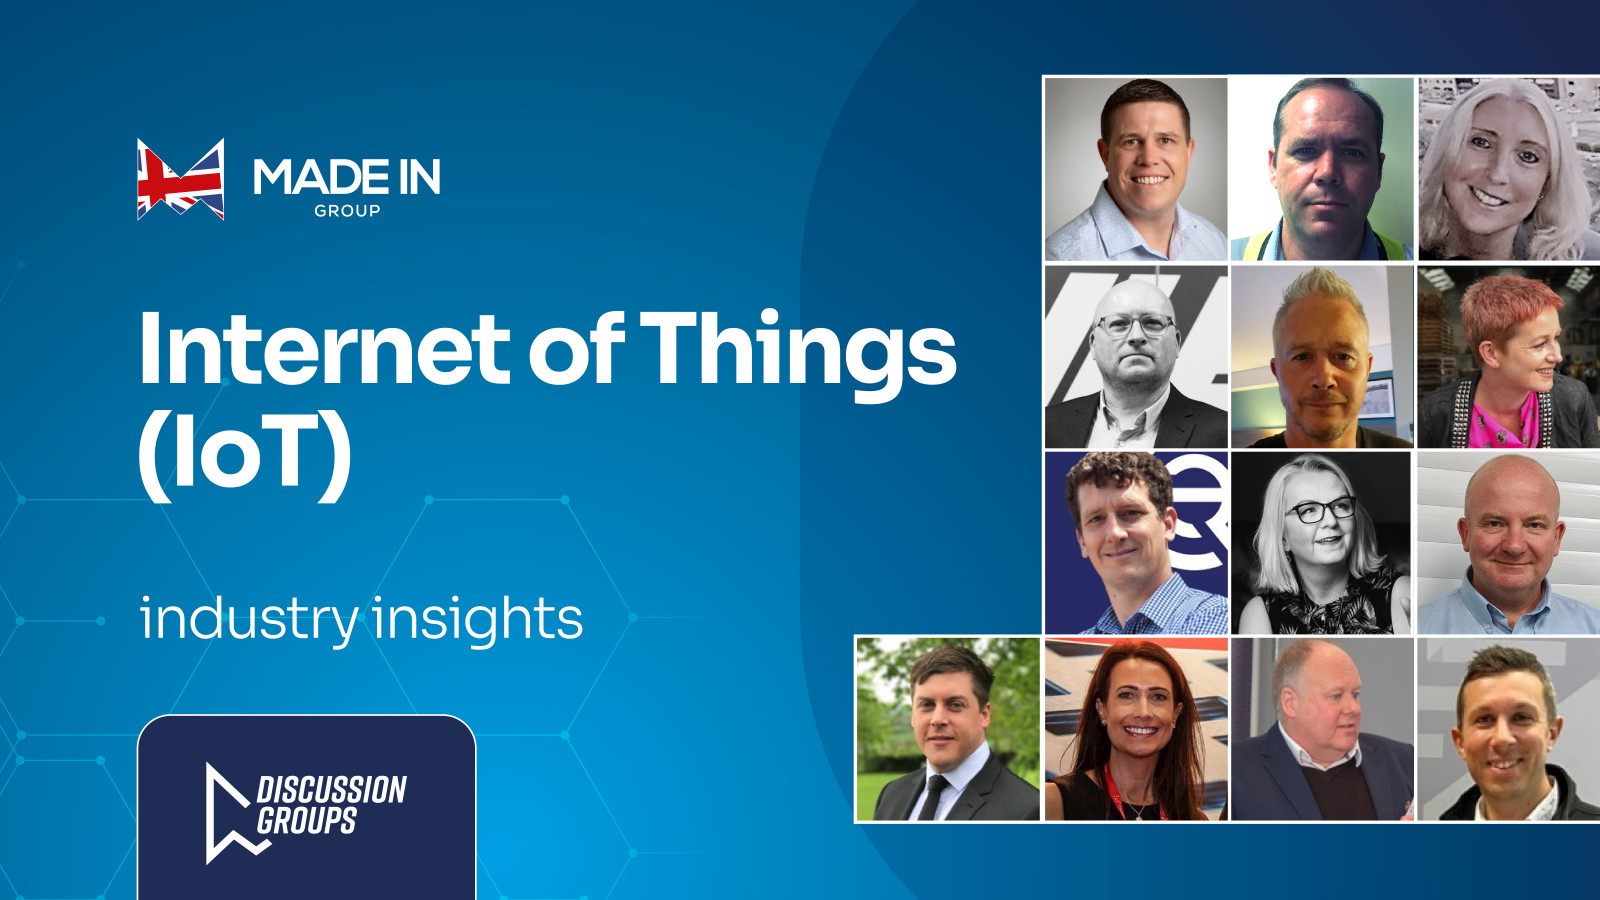 The risks and rewards of Internet of Things (IoT) according to MFG Leaders